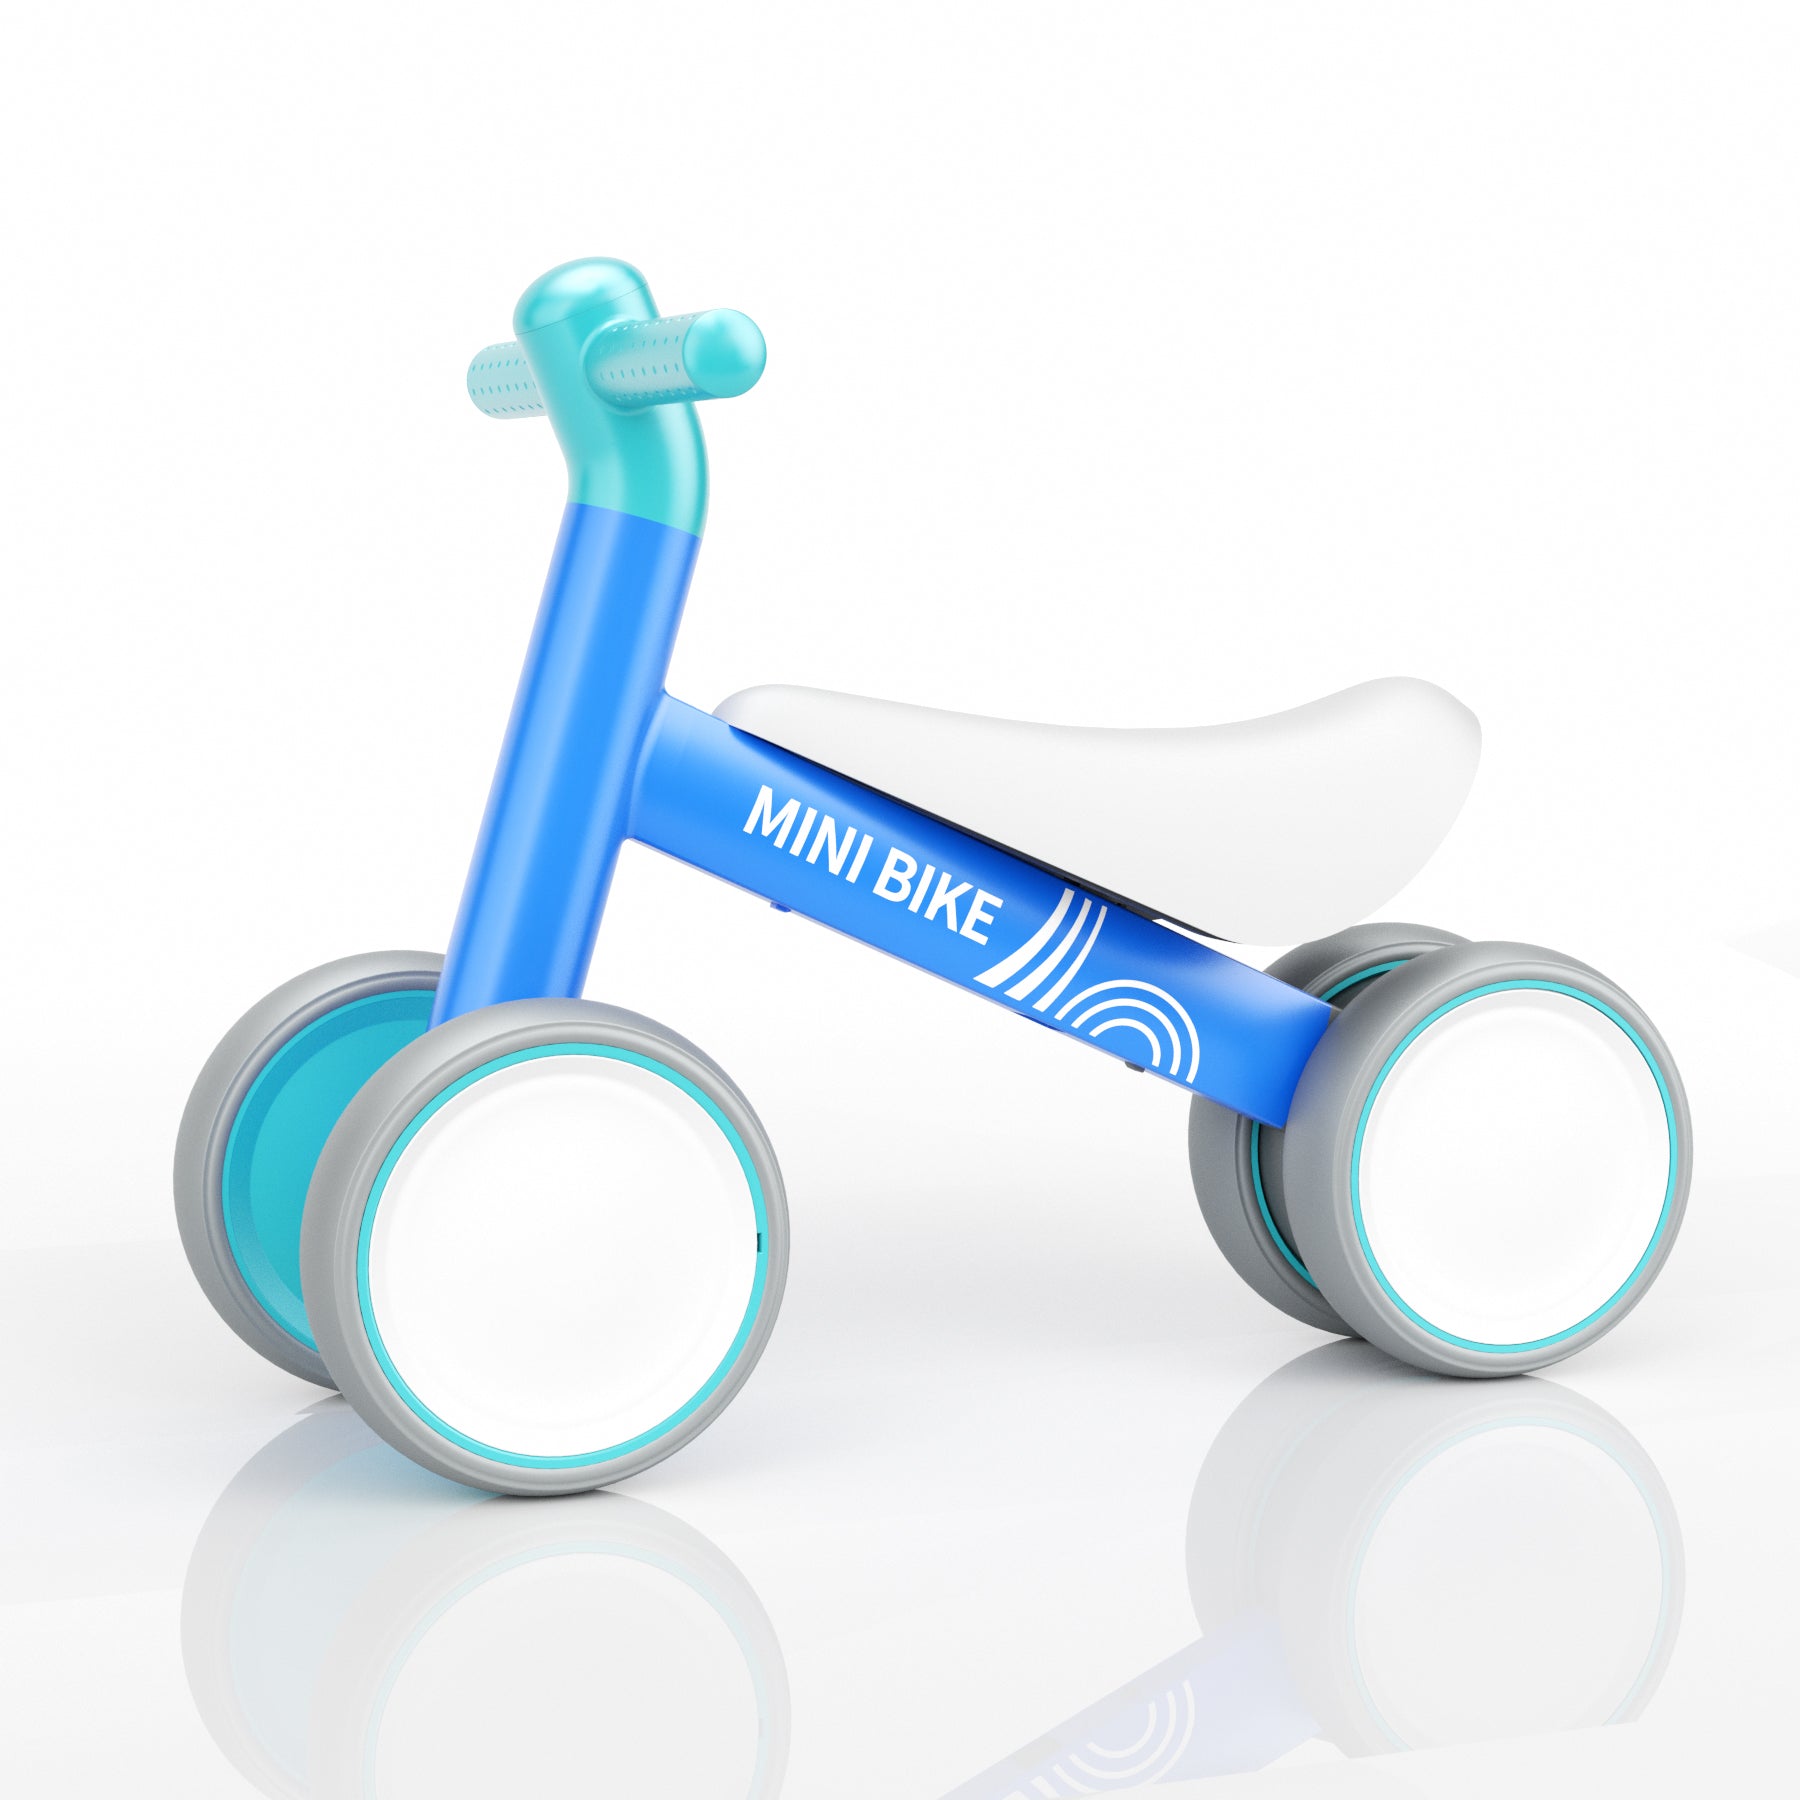 67i Baby Toddler Balance Bike for 2 year old - Blue